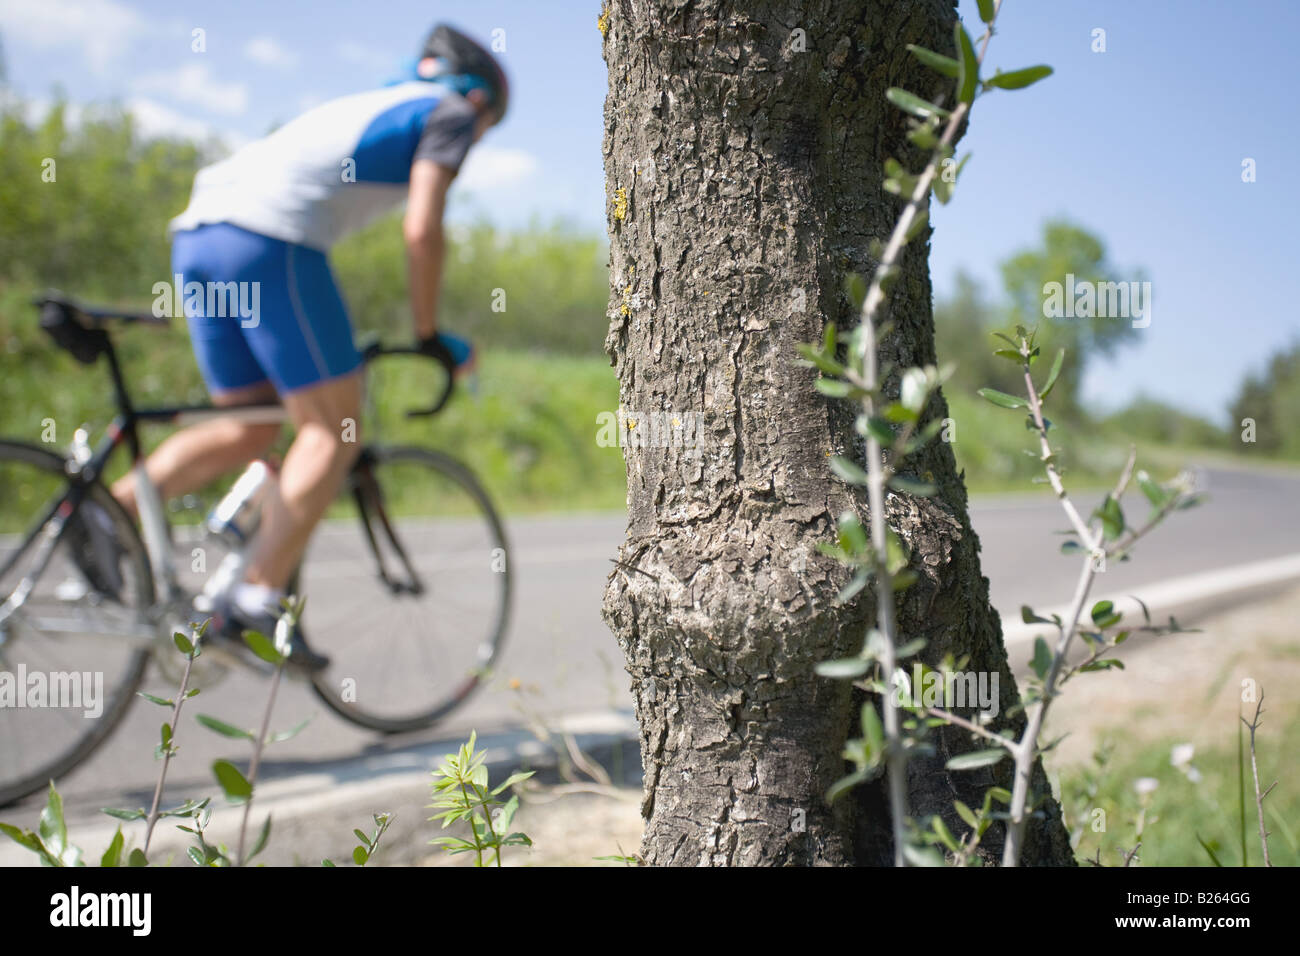 Cyclist cycling on road with tree bark in the foreground Stock Photo